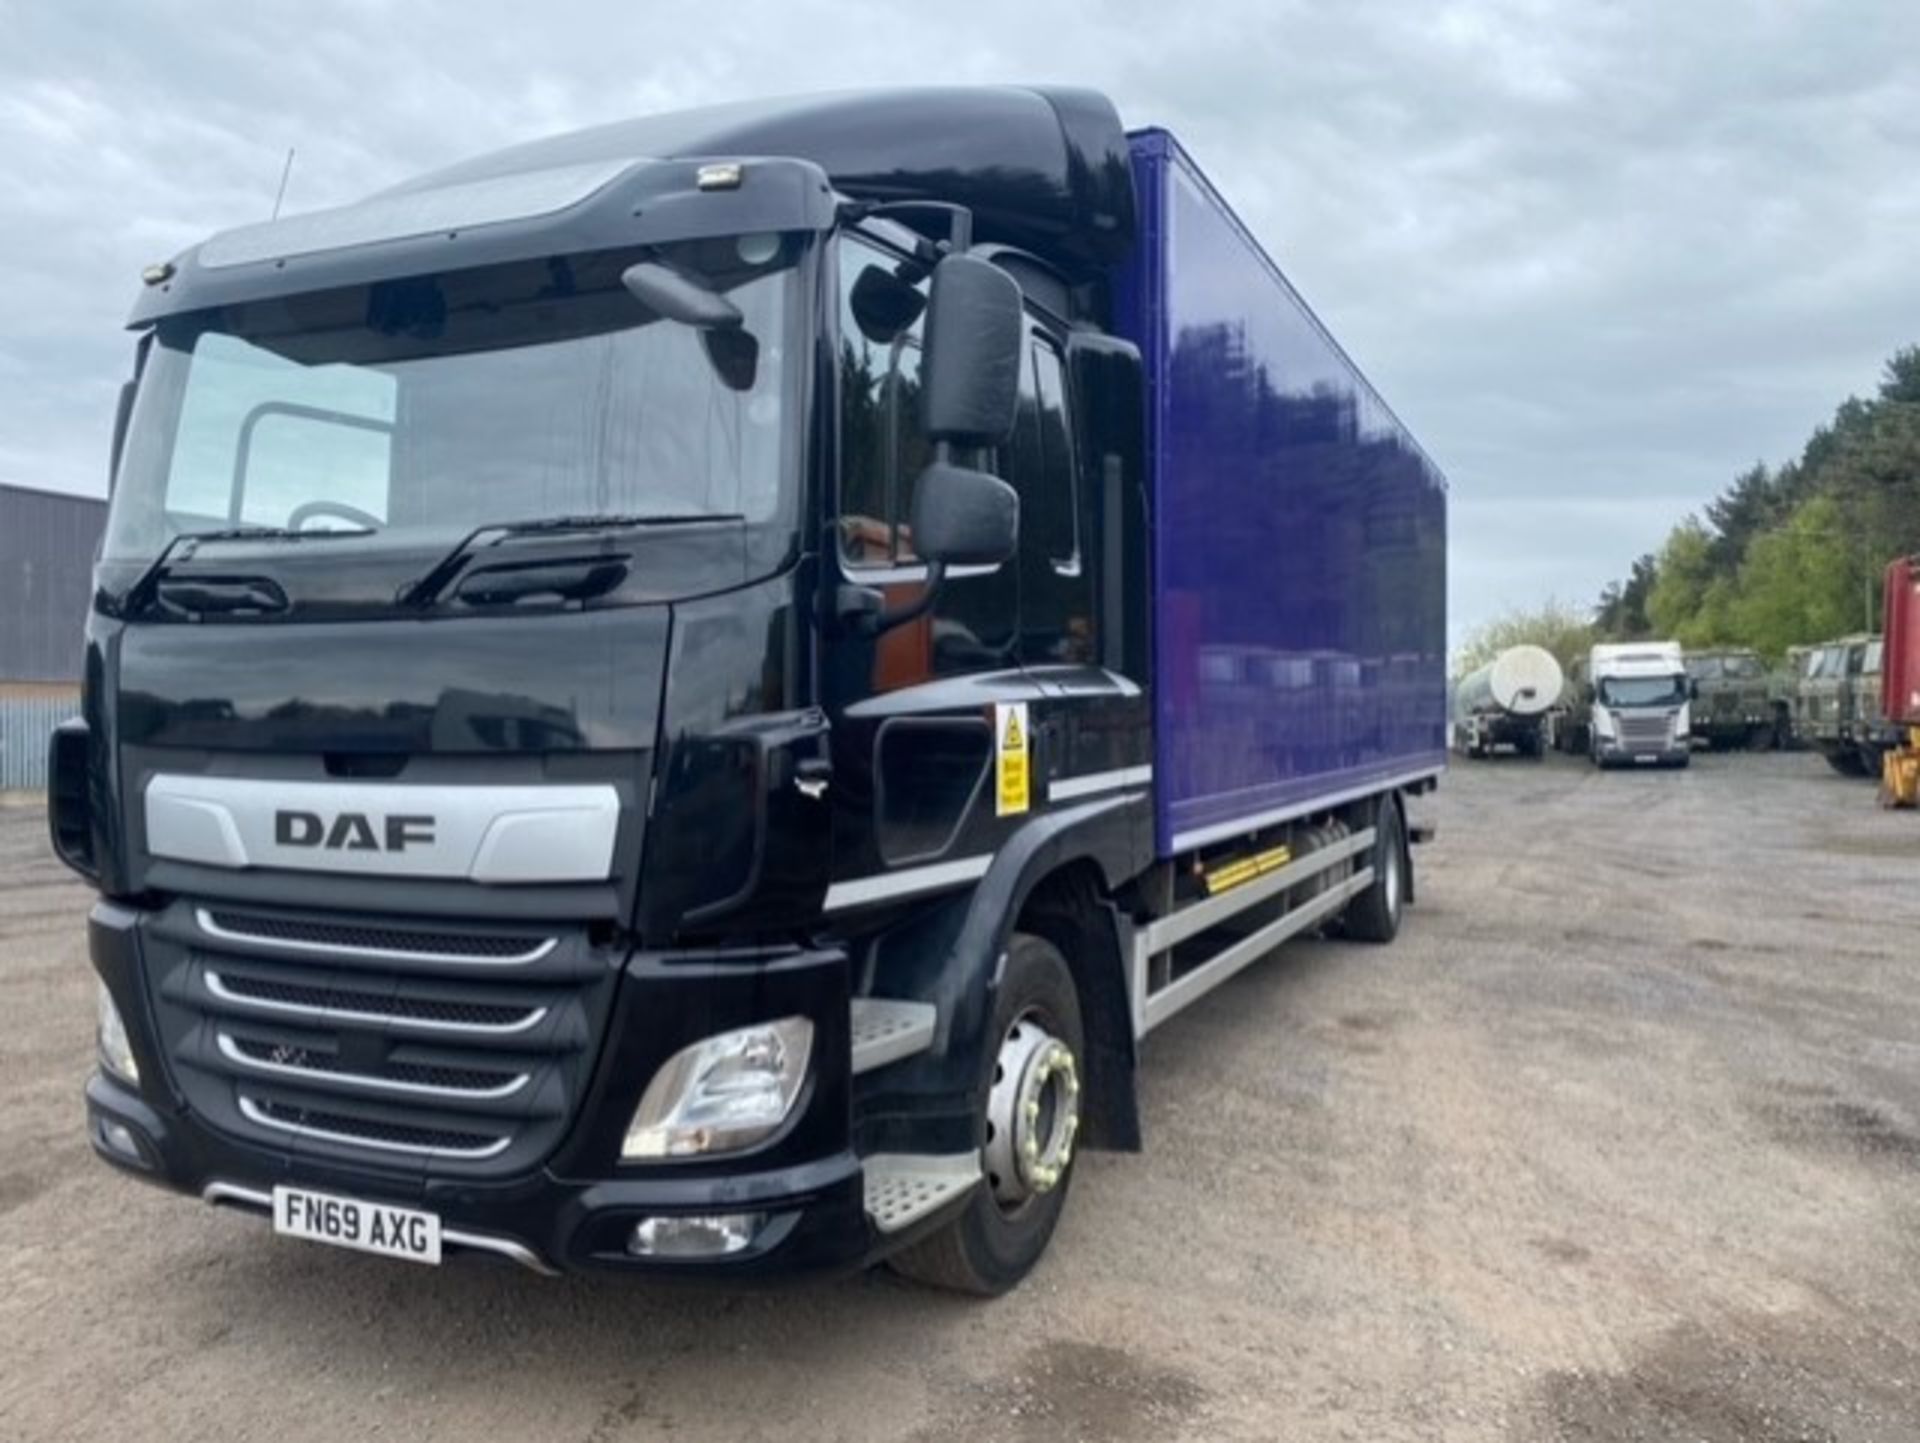 2019, DAF CF 260 FA (Ex-Fleet Owned & Maintained) - FN69 AXG (18 Ton Rigid Truck with Tail Lift) - Image 2 of 16